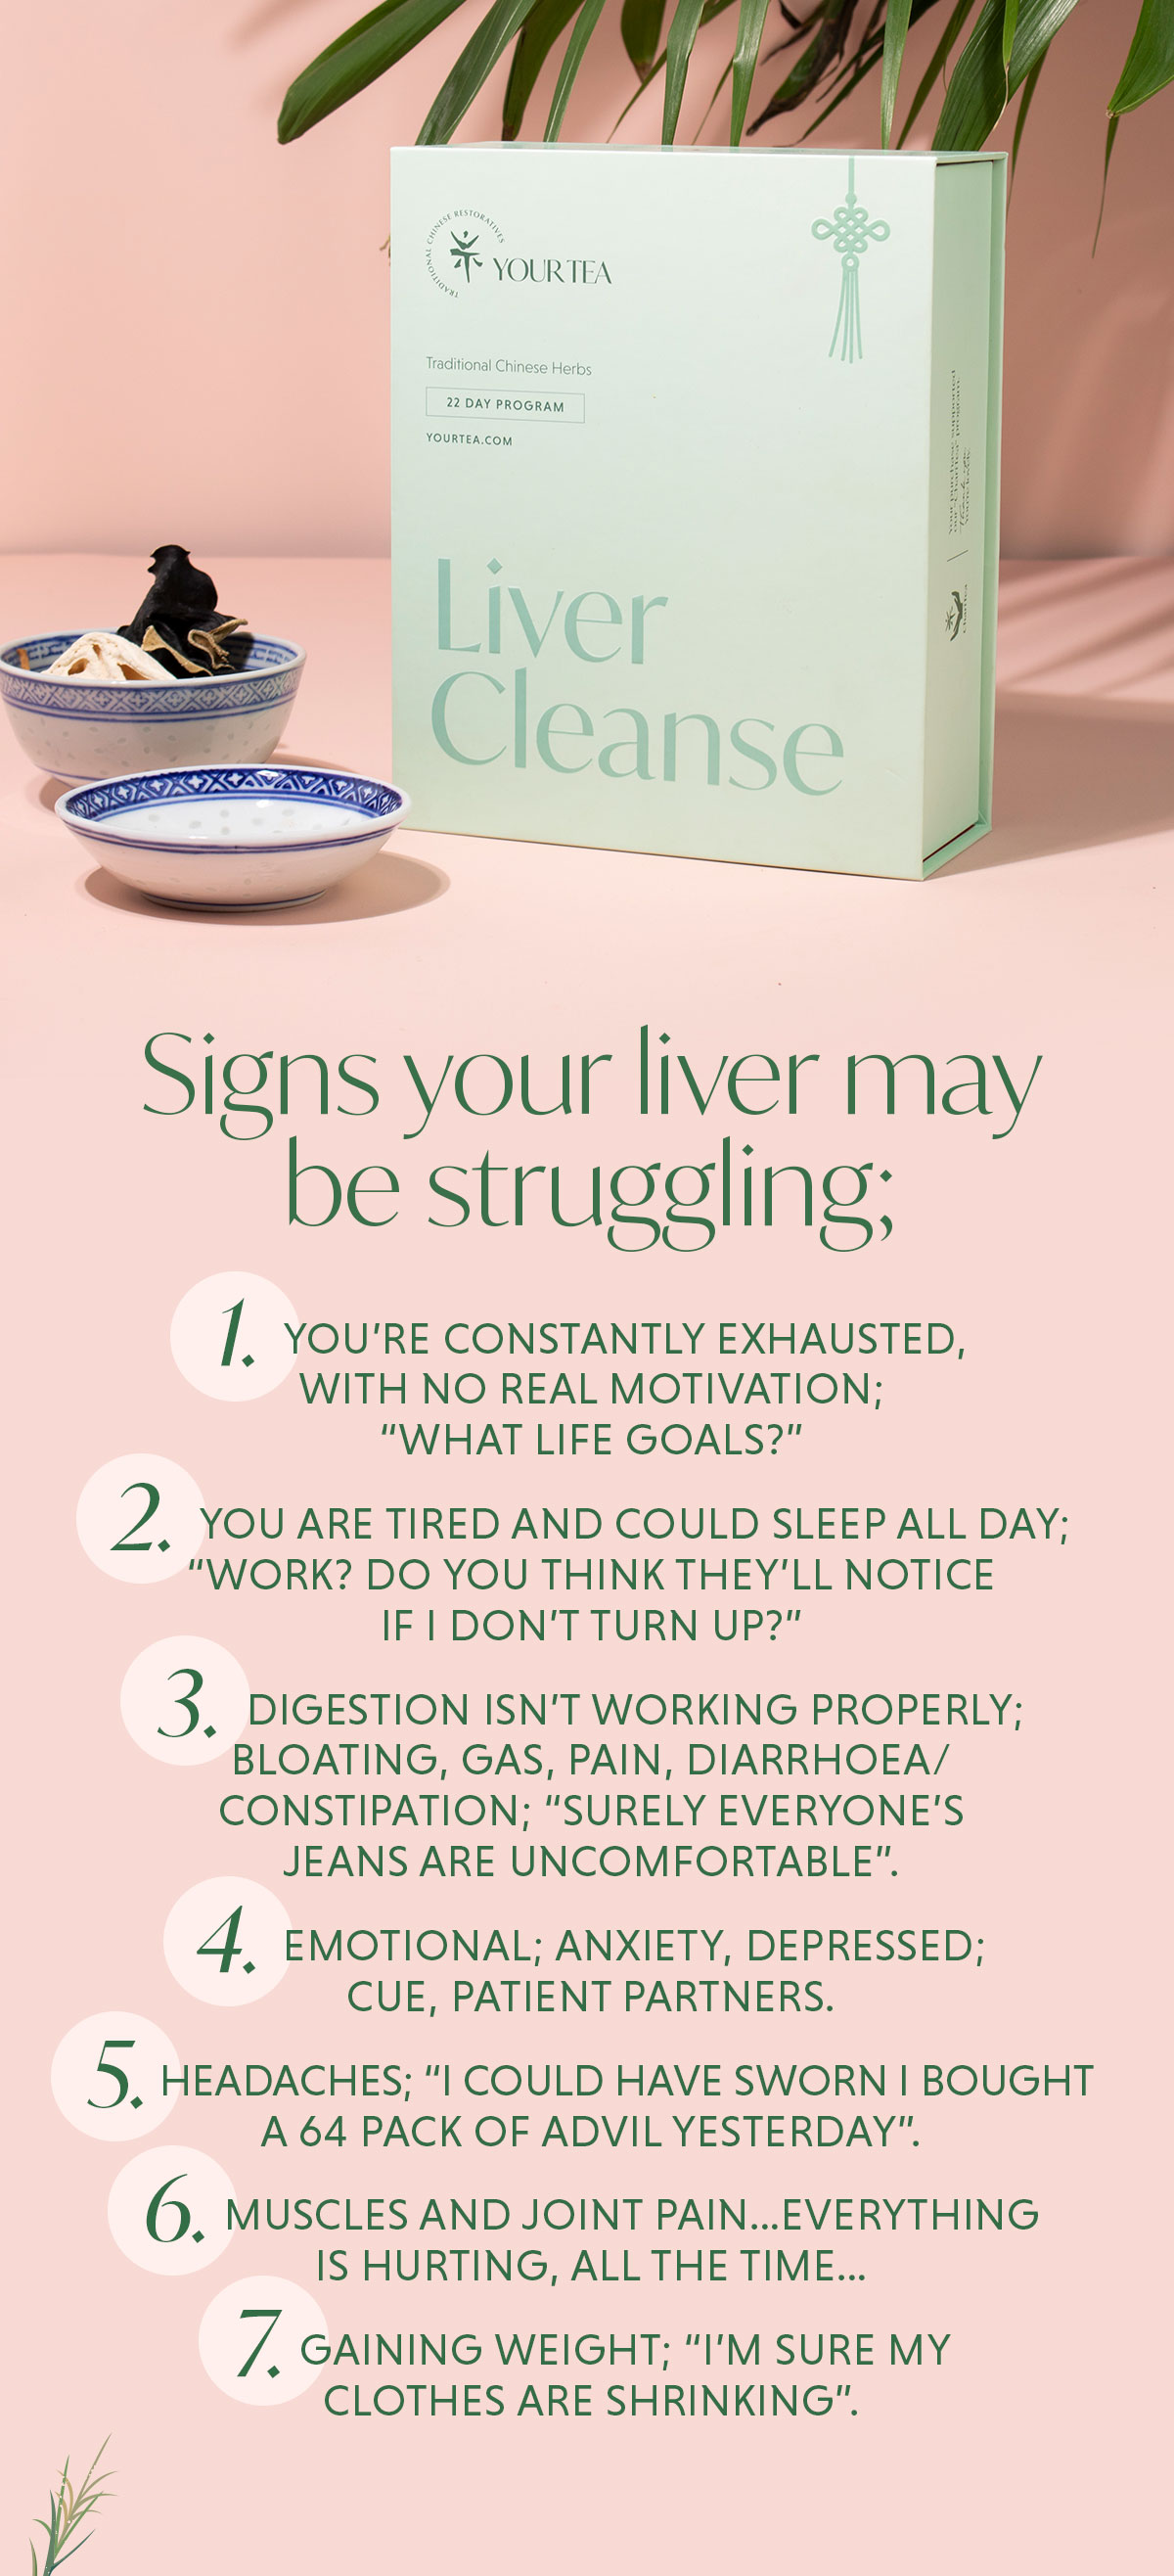 Signs your liver may be struggling